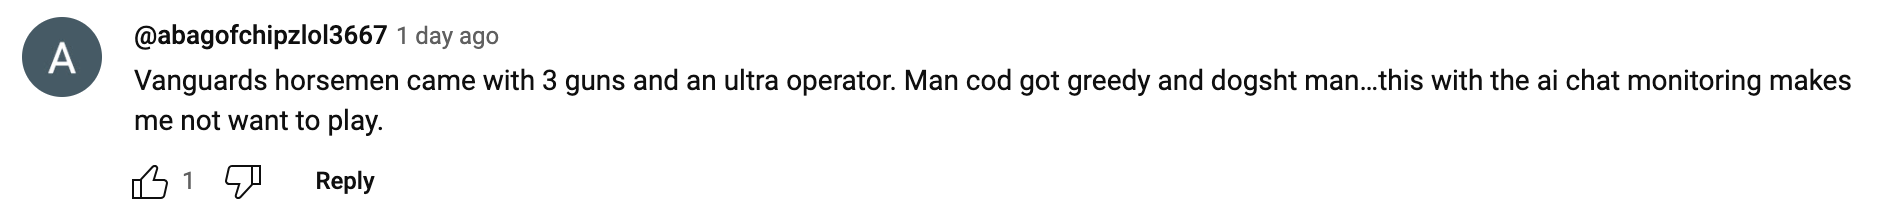 YouTube comment about Vanguard Horsemen bundle being better than MW3 2